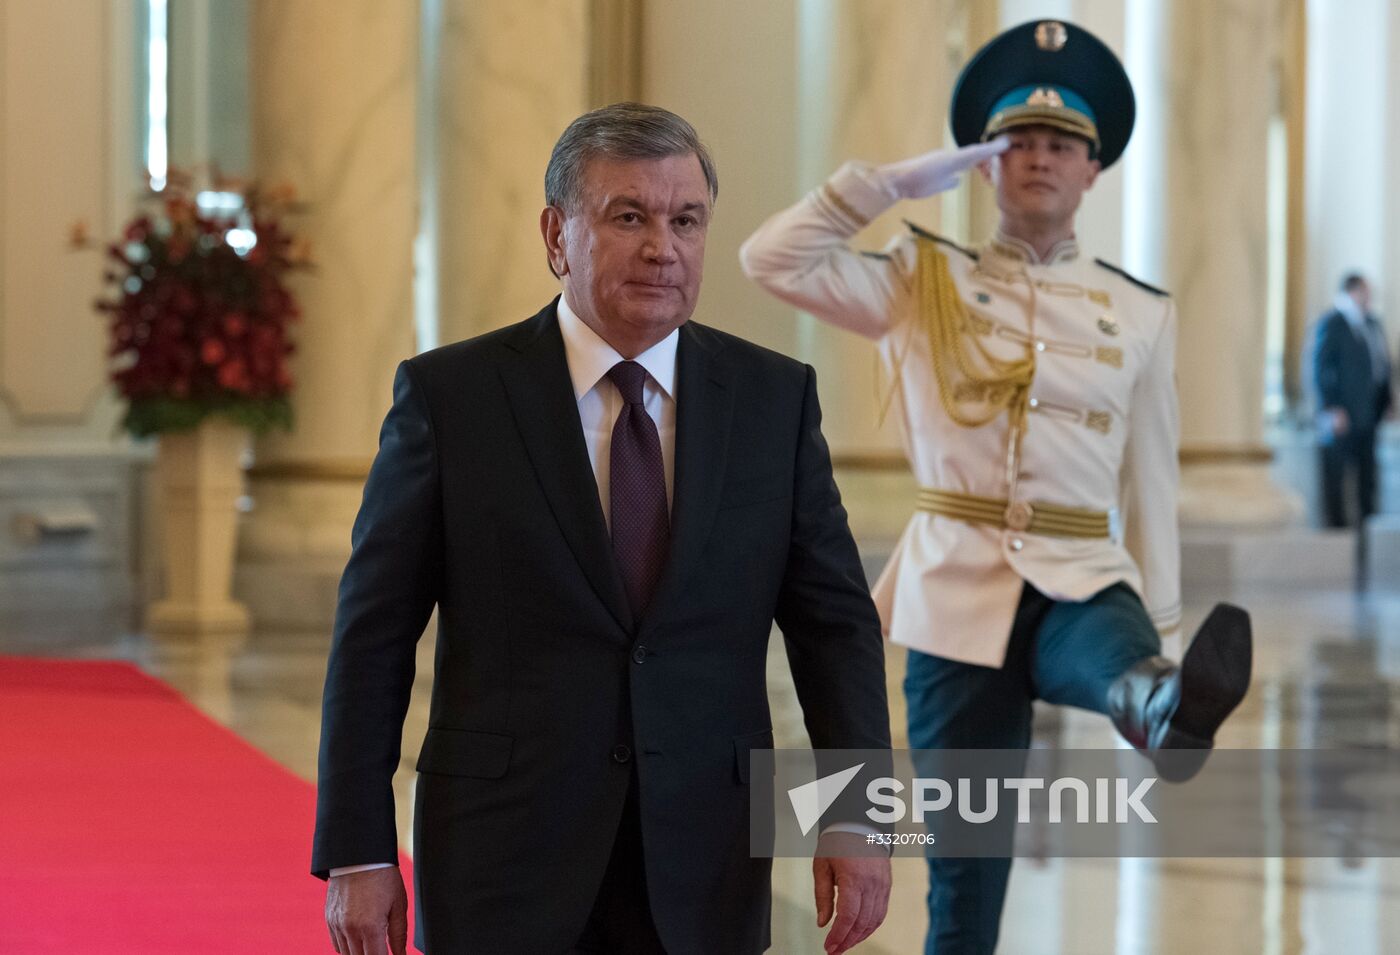 Heads of state of Central Asian countries meet in Astana